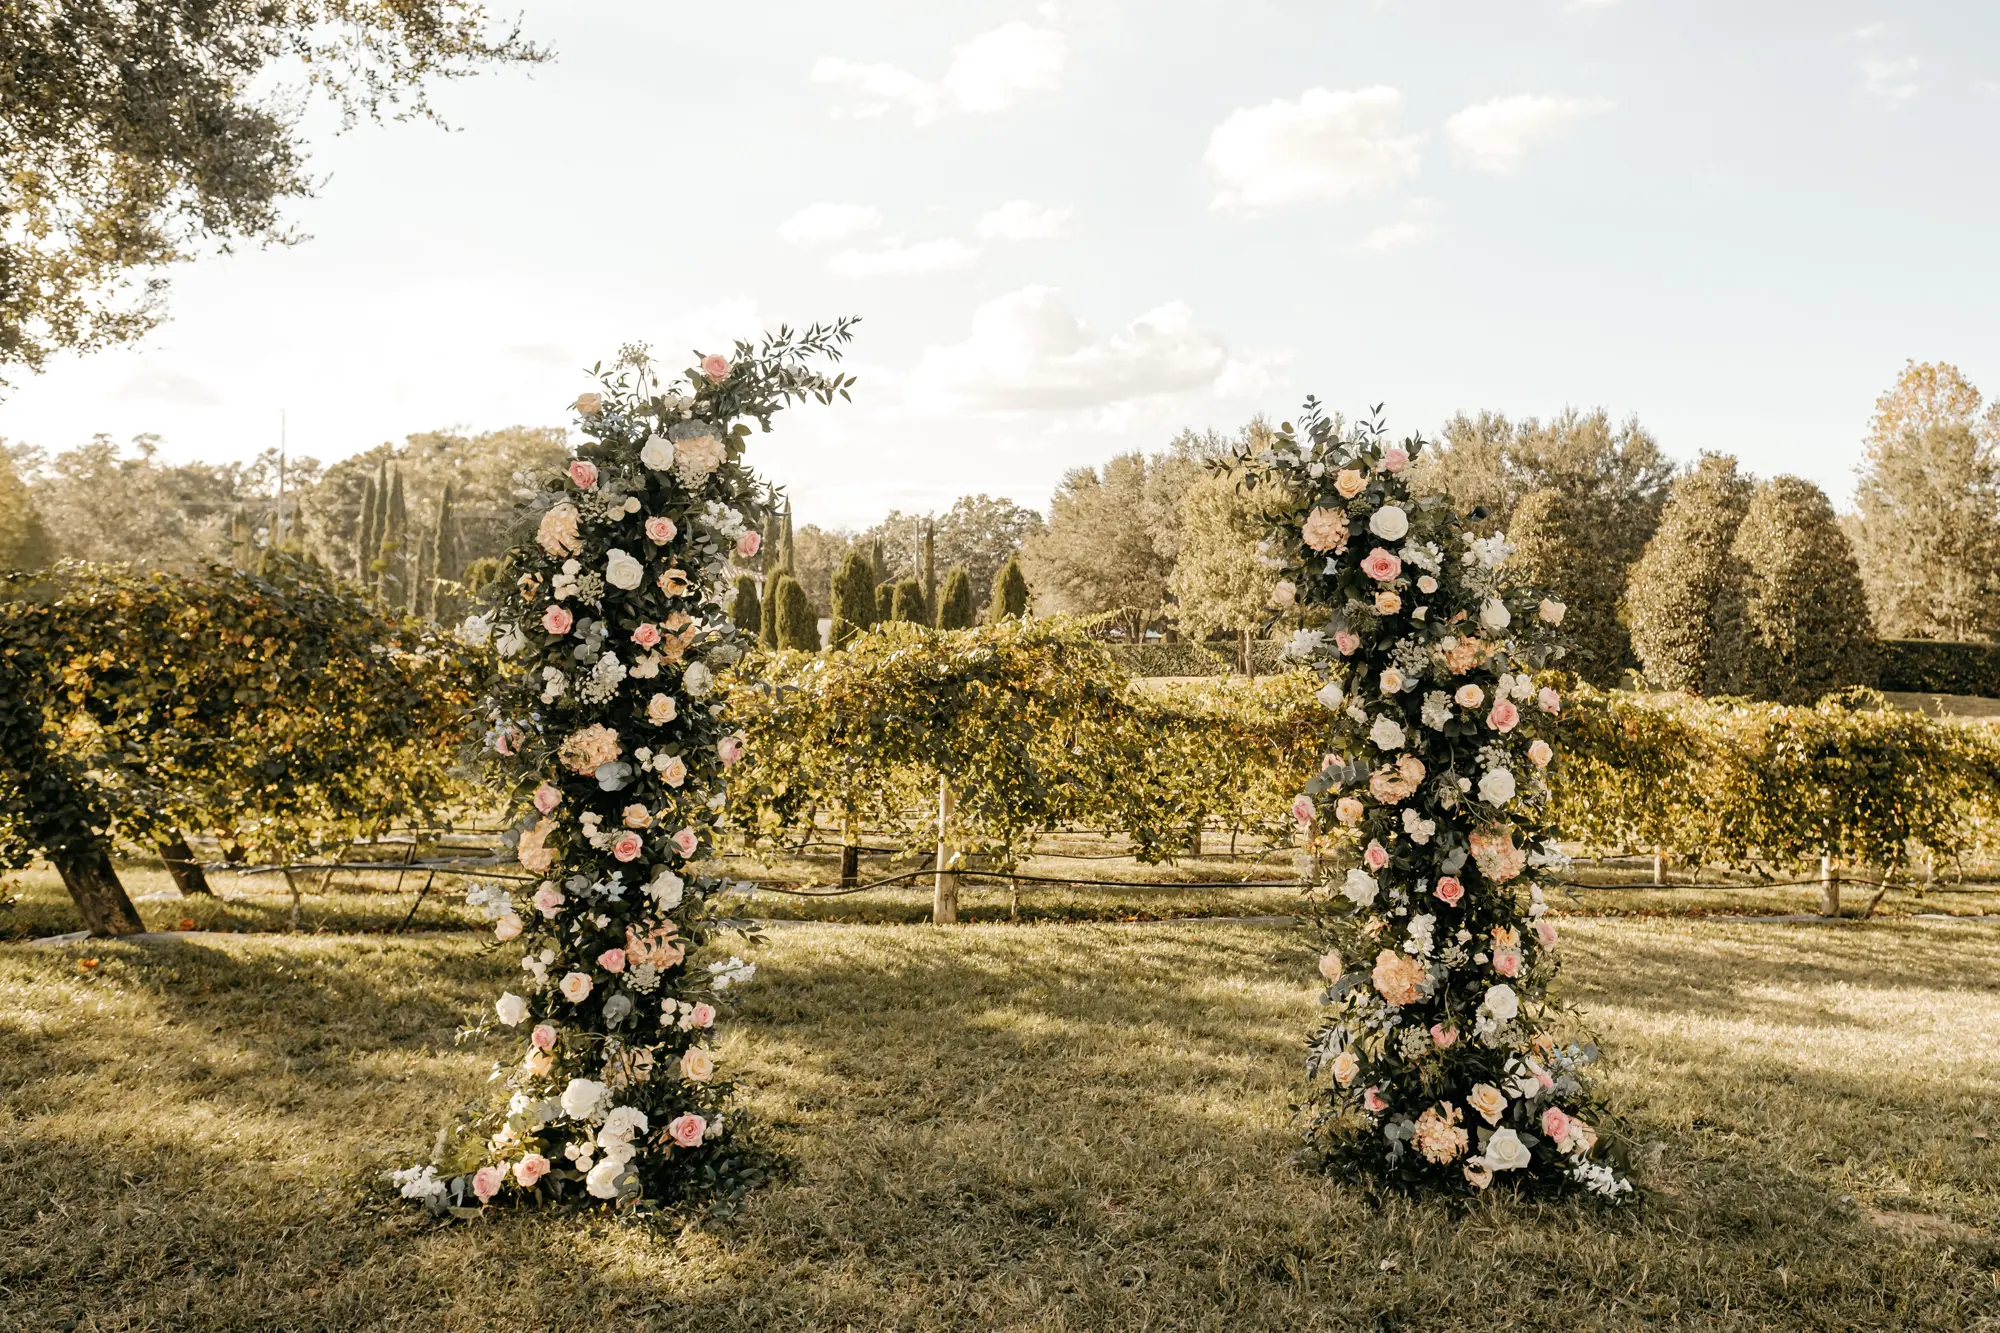 White and Pink Roses, Hydrangeas, and Greenery Wedding Ceremony Altar Decor Ideas | Tampa Bay Event Florist Monarch Events